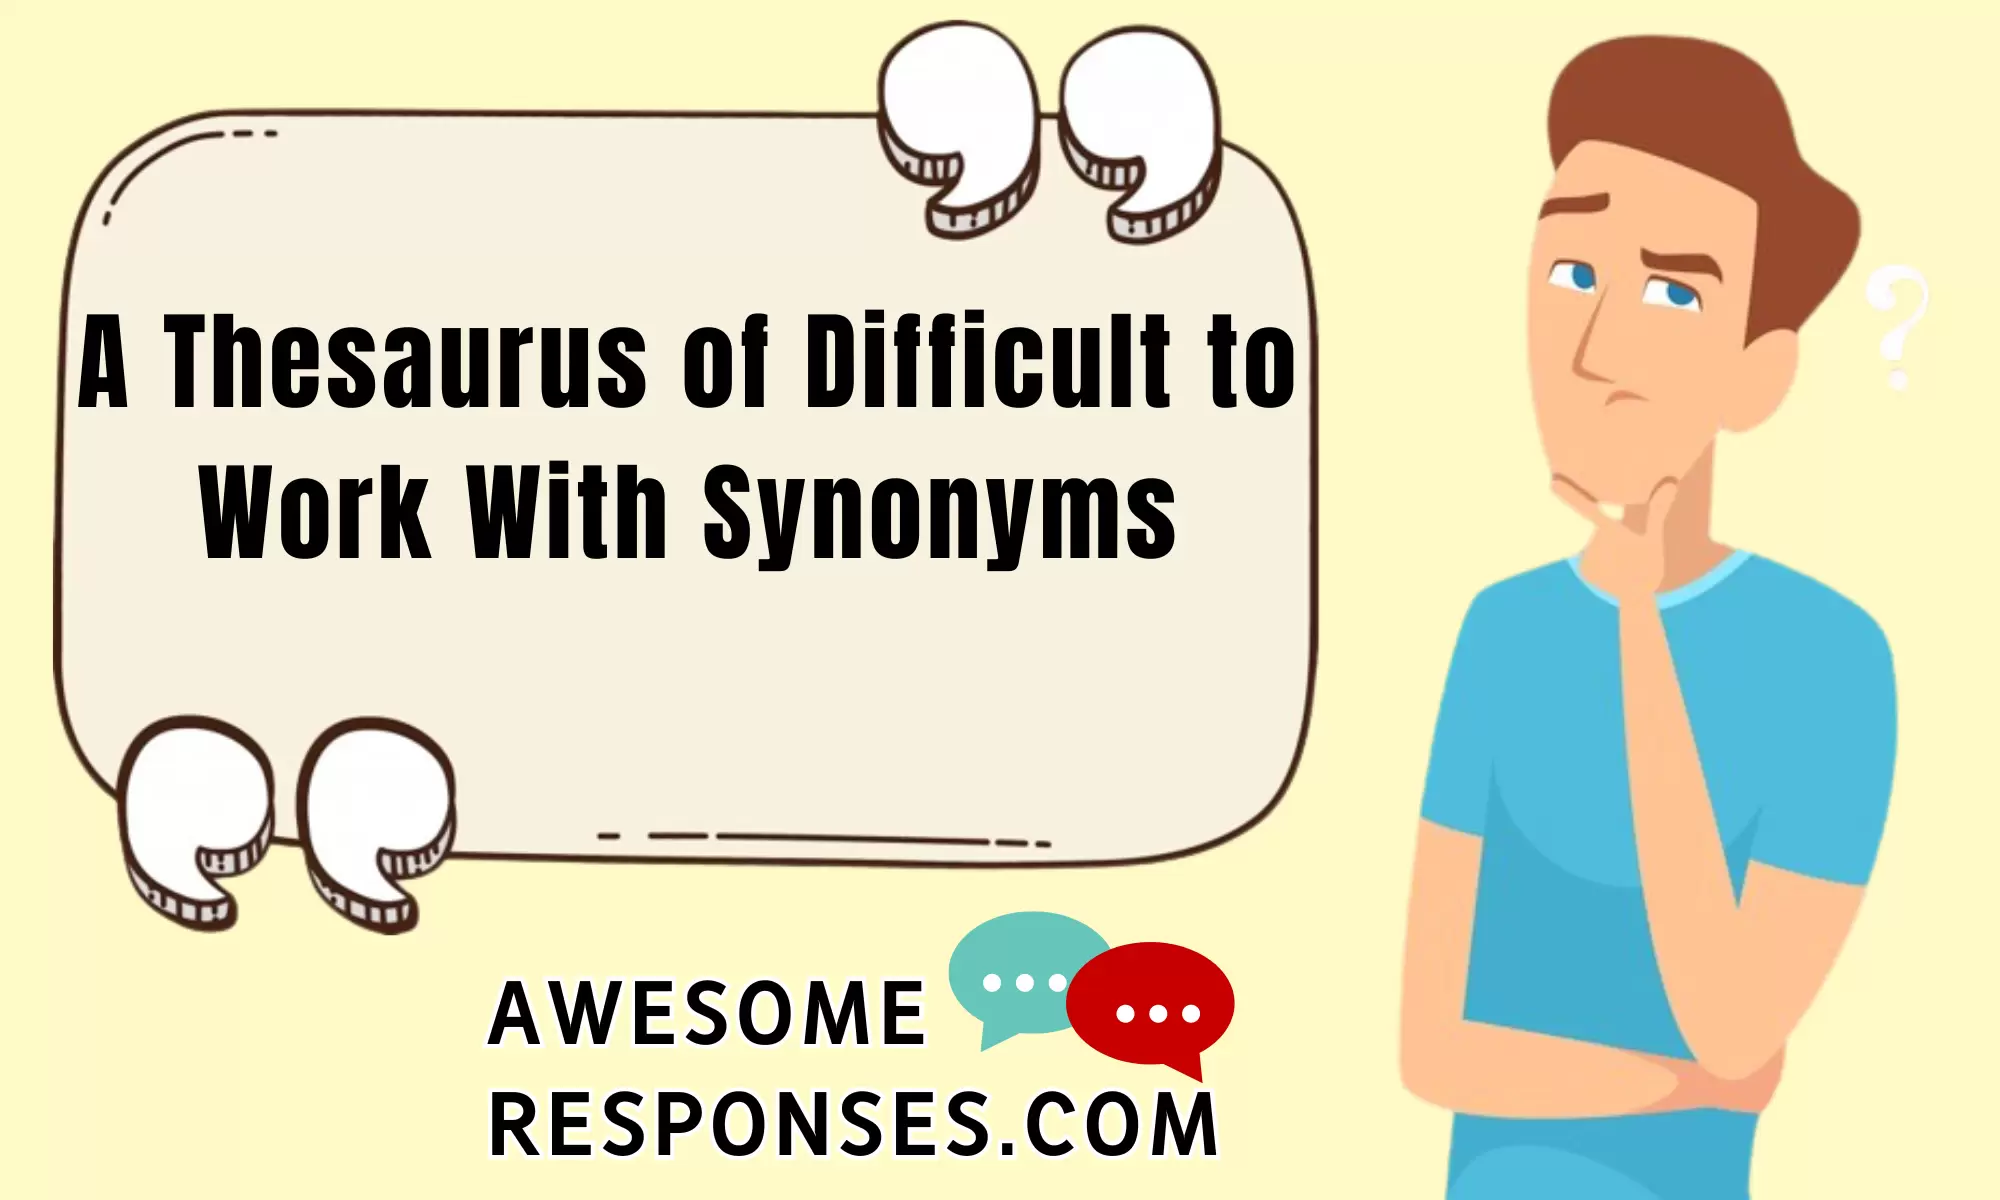 A Thesaurus of Difficult to Work With Synonyms